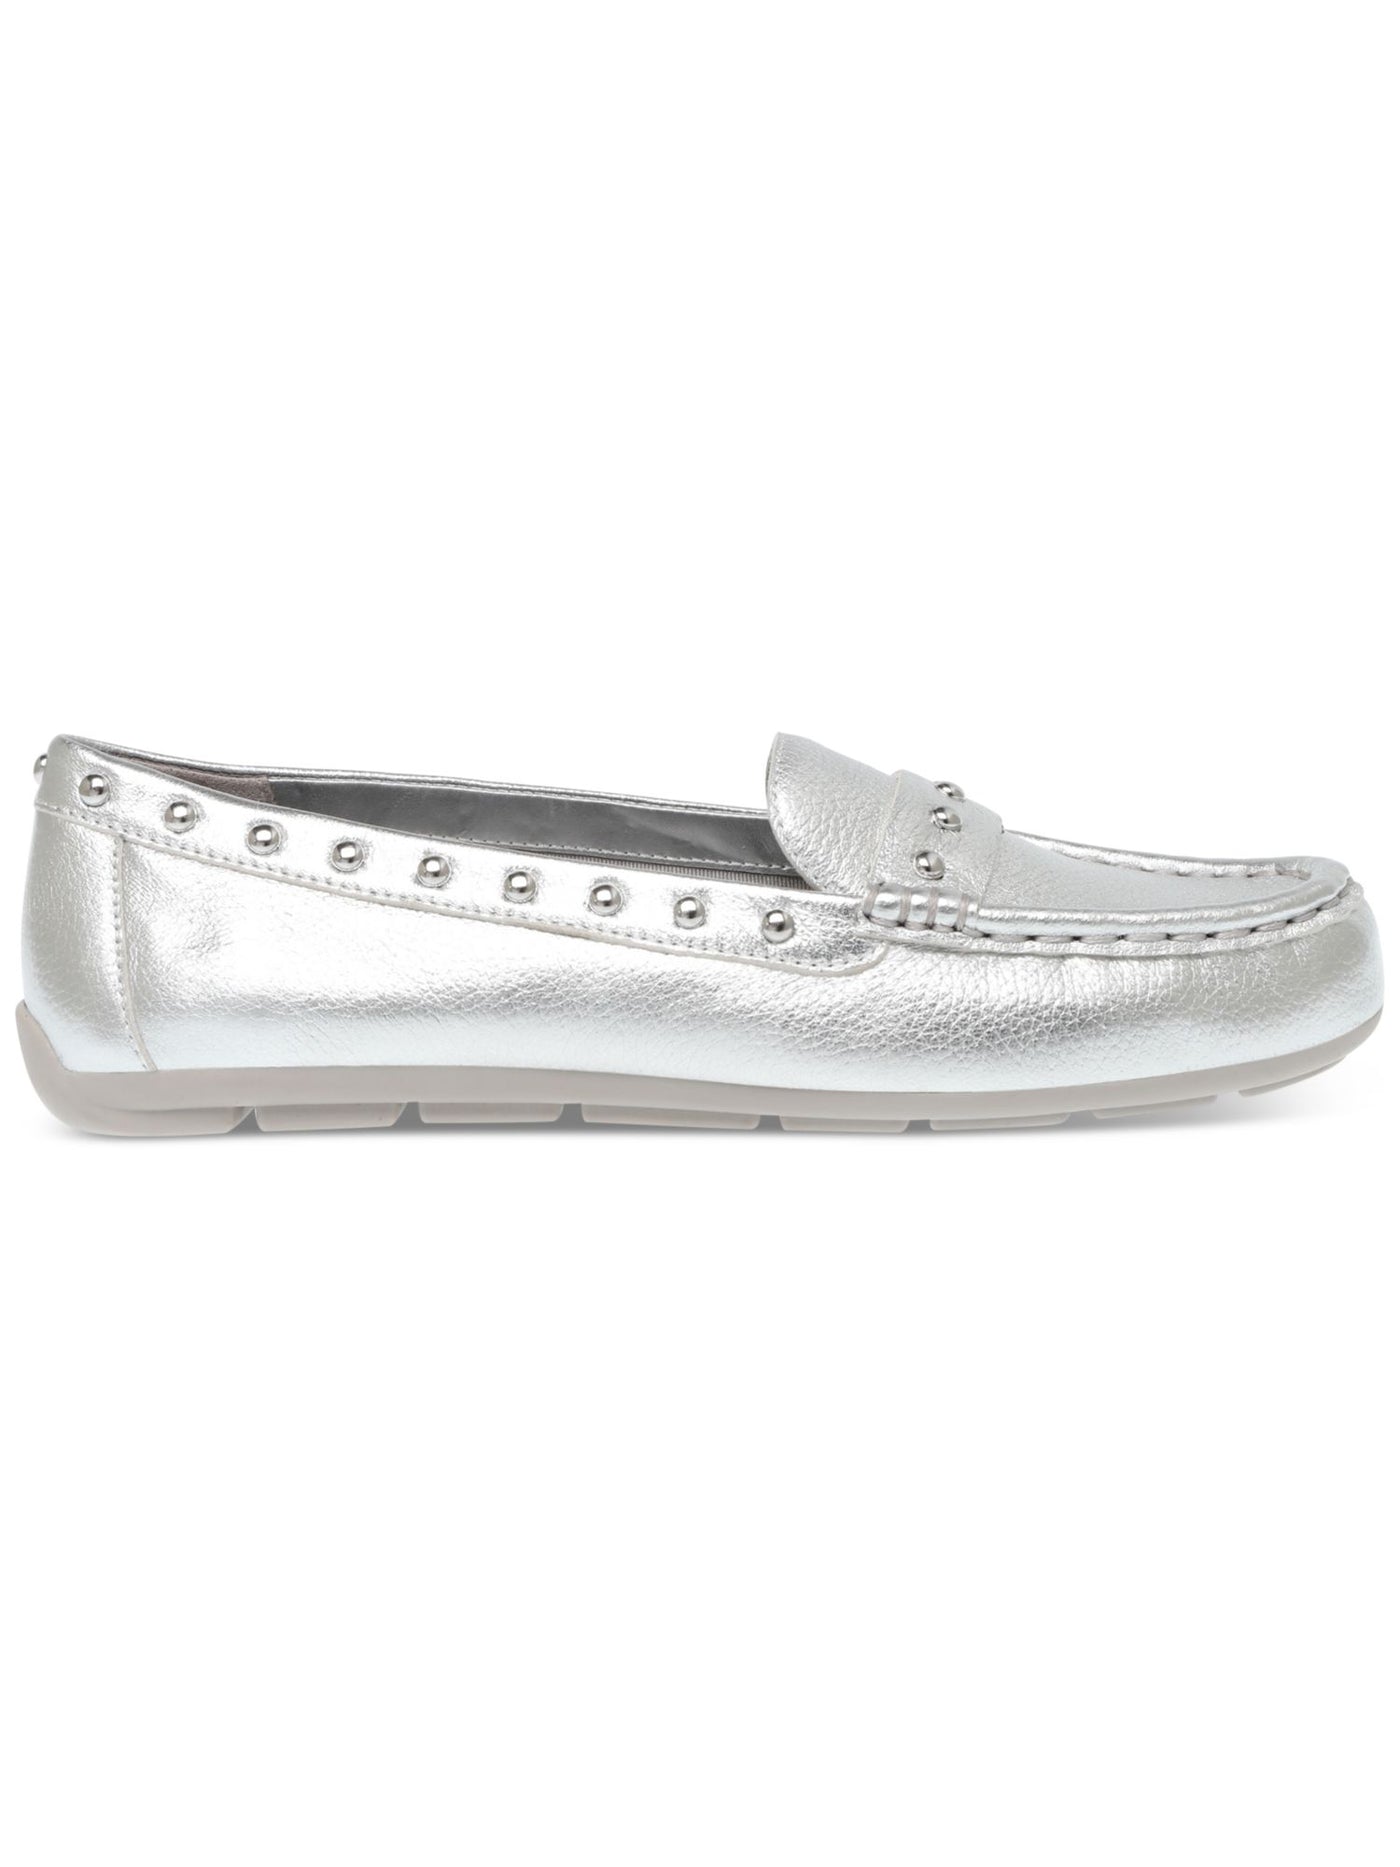 ANNE KLEIN Womens Silver Studded Detail Arch Support Padded Onit Round Toe Slip On Leather Moccasins Shoes 8.5 M